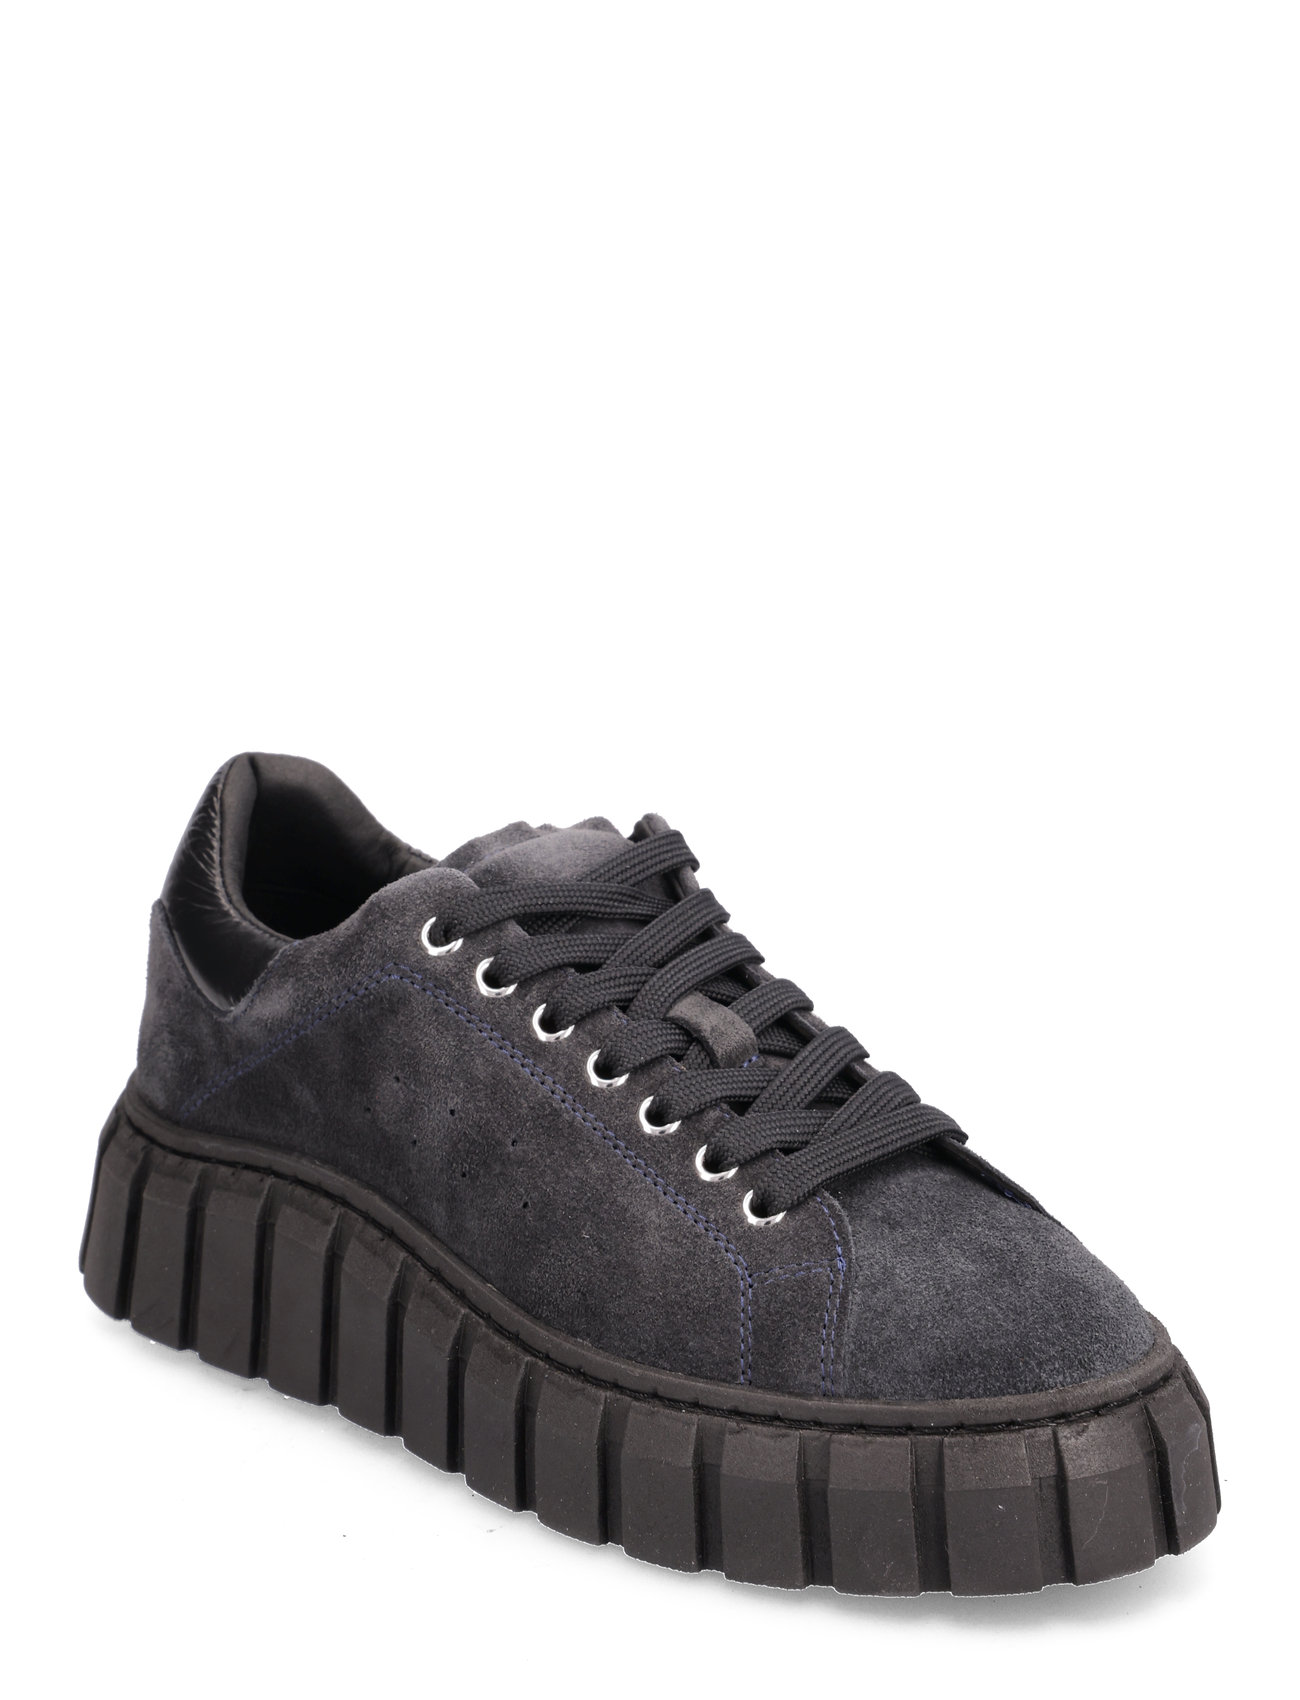 Balo Sneaker - Black/Black Suede Shoes Sneakers Chunky Sneakers Black Garment Project